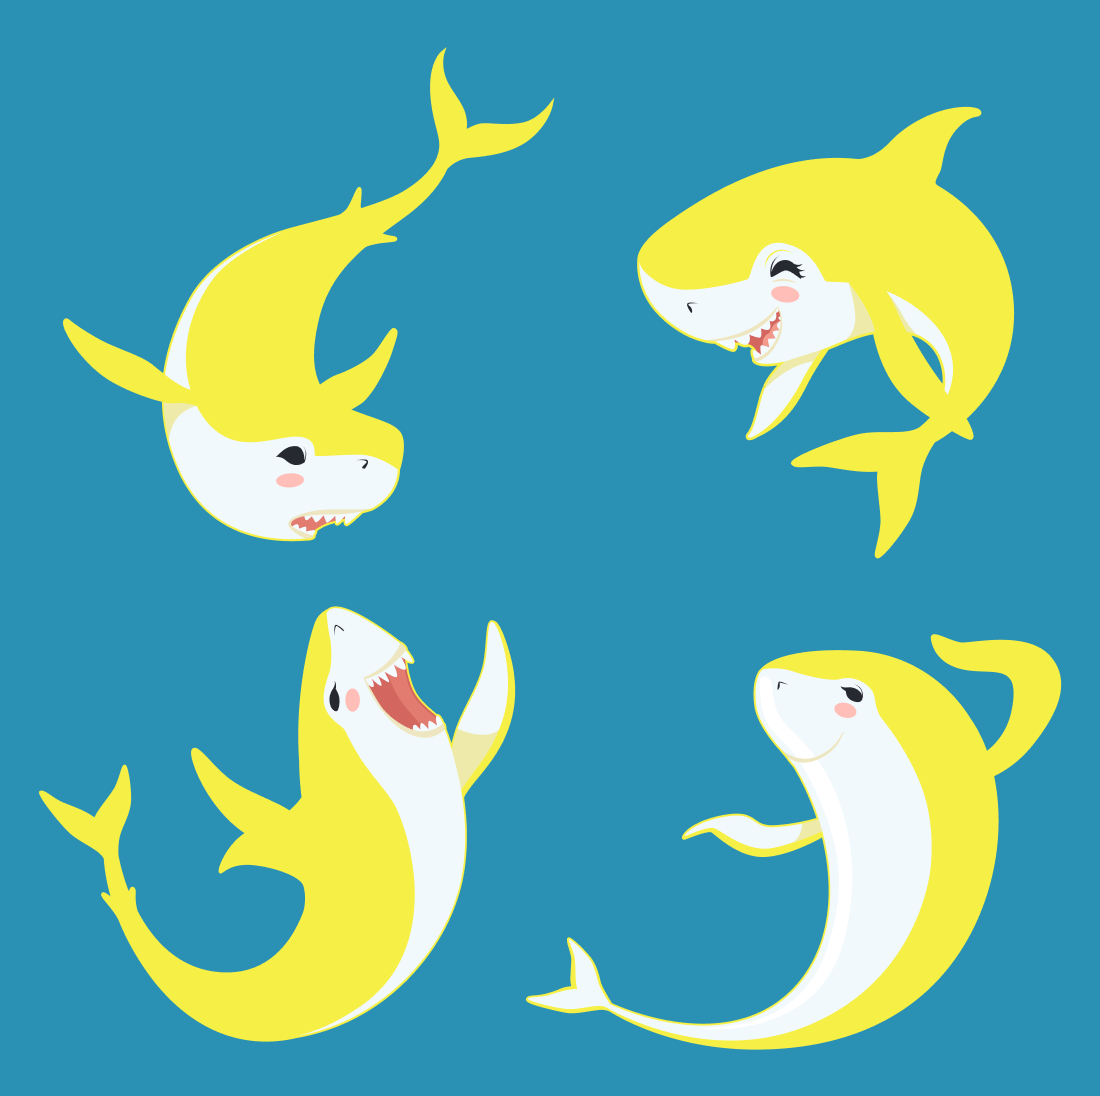 A yellow baby shark yawns in the blue water.